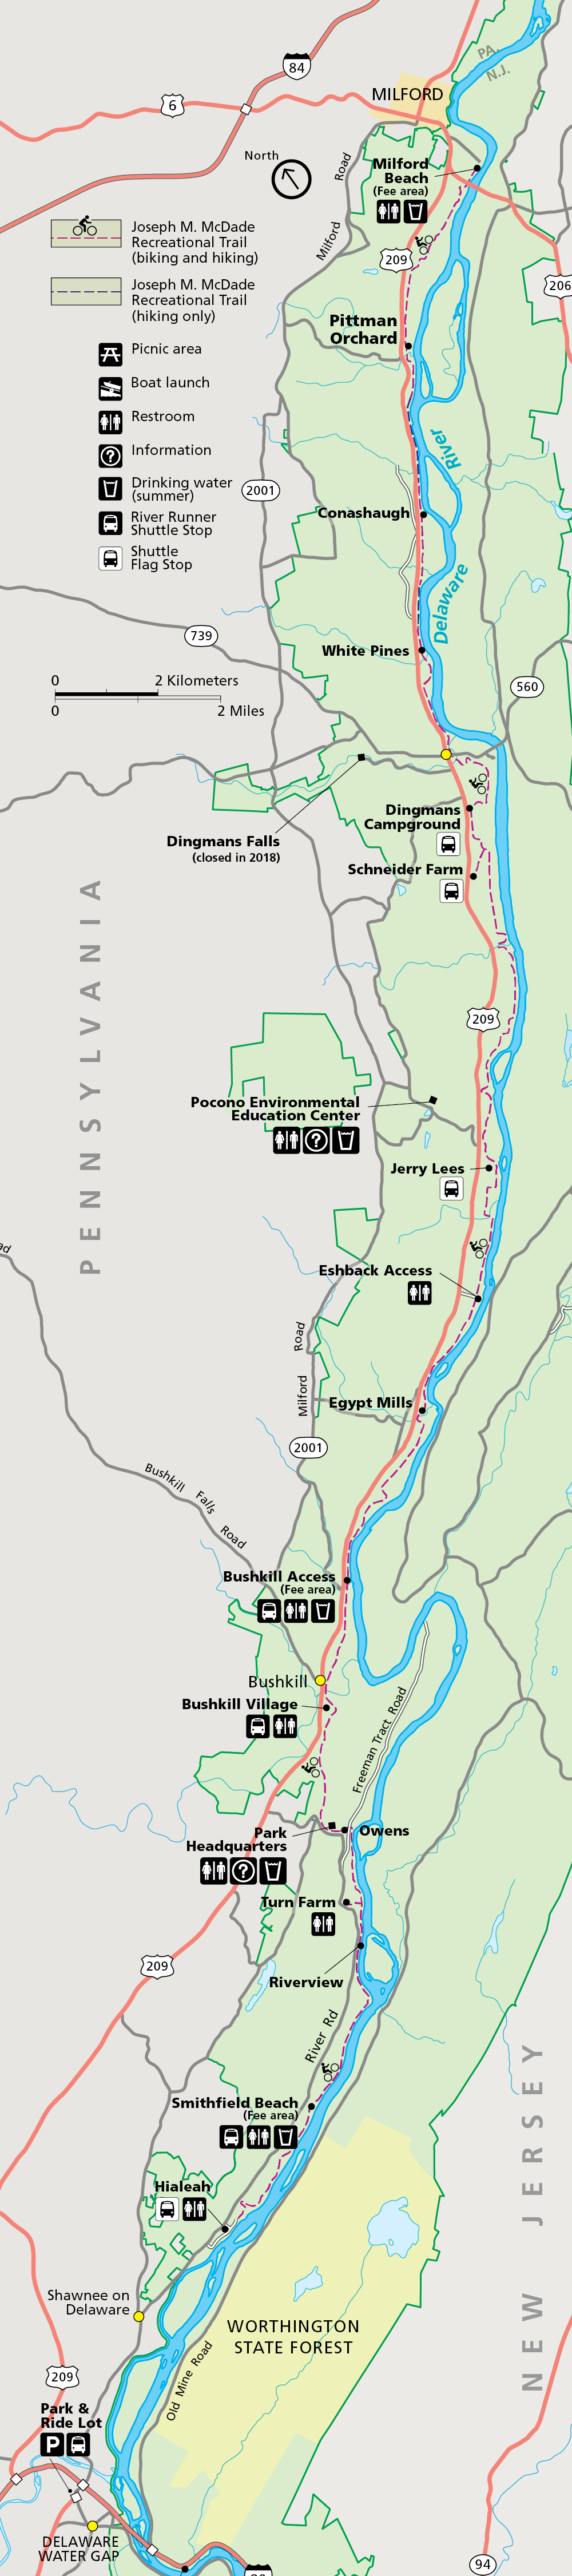 A map of the park highighting the McDade Trail.